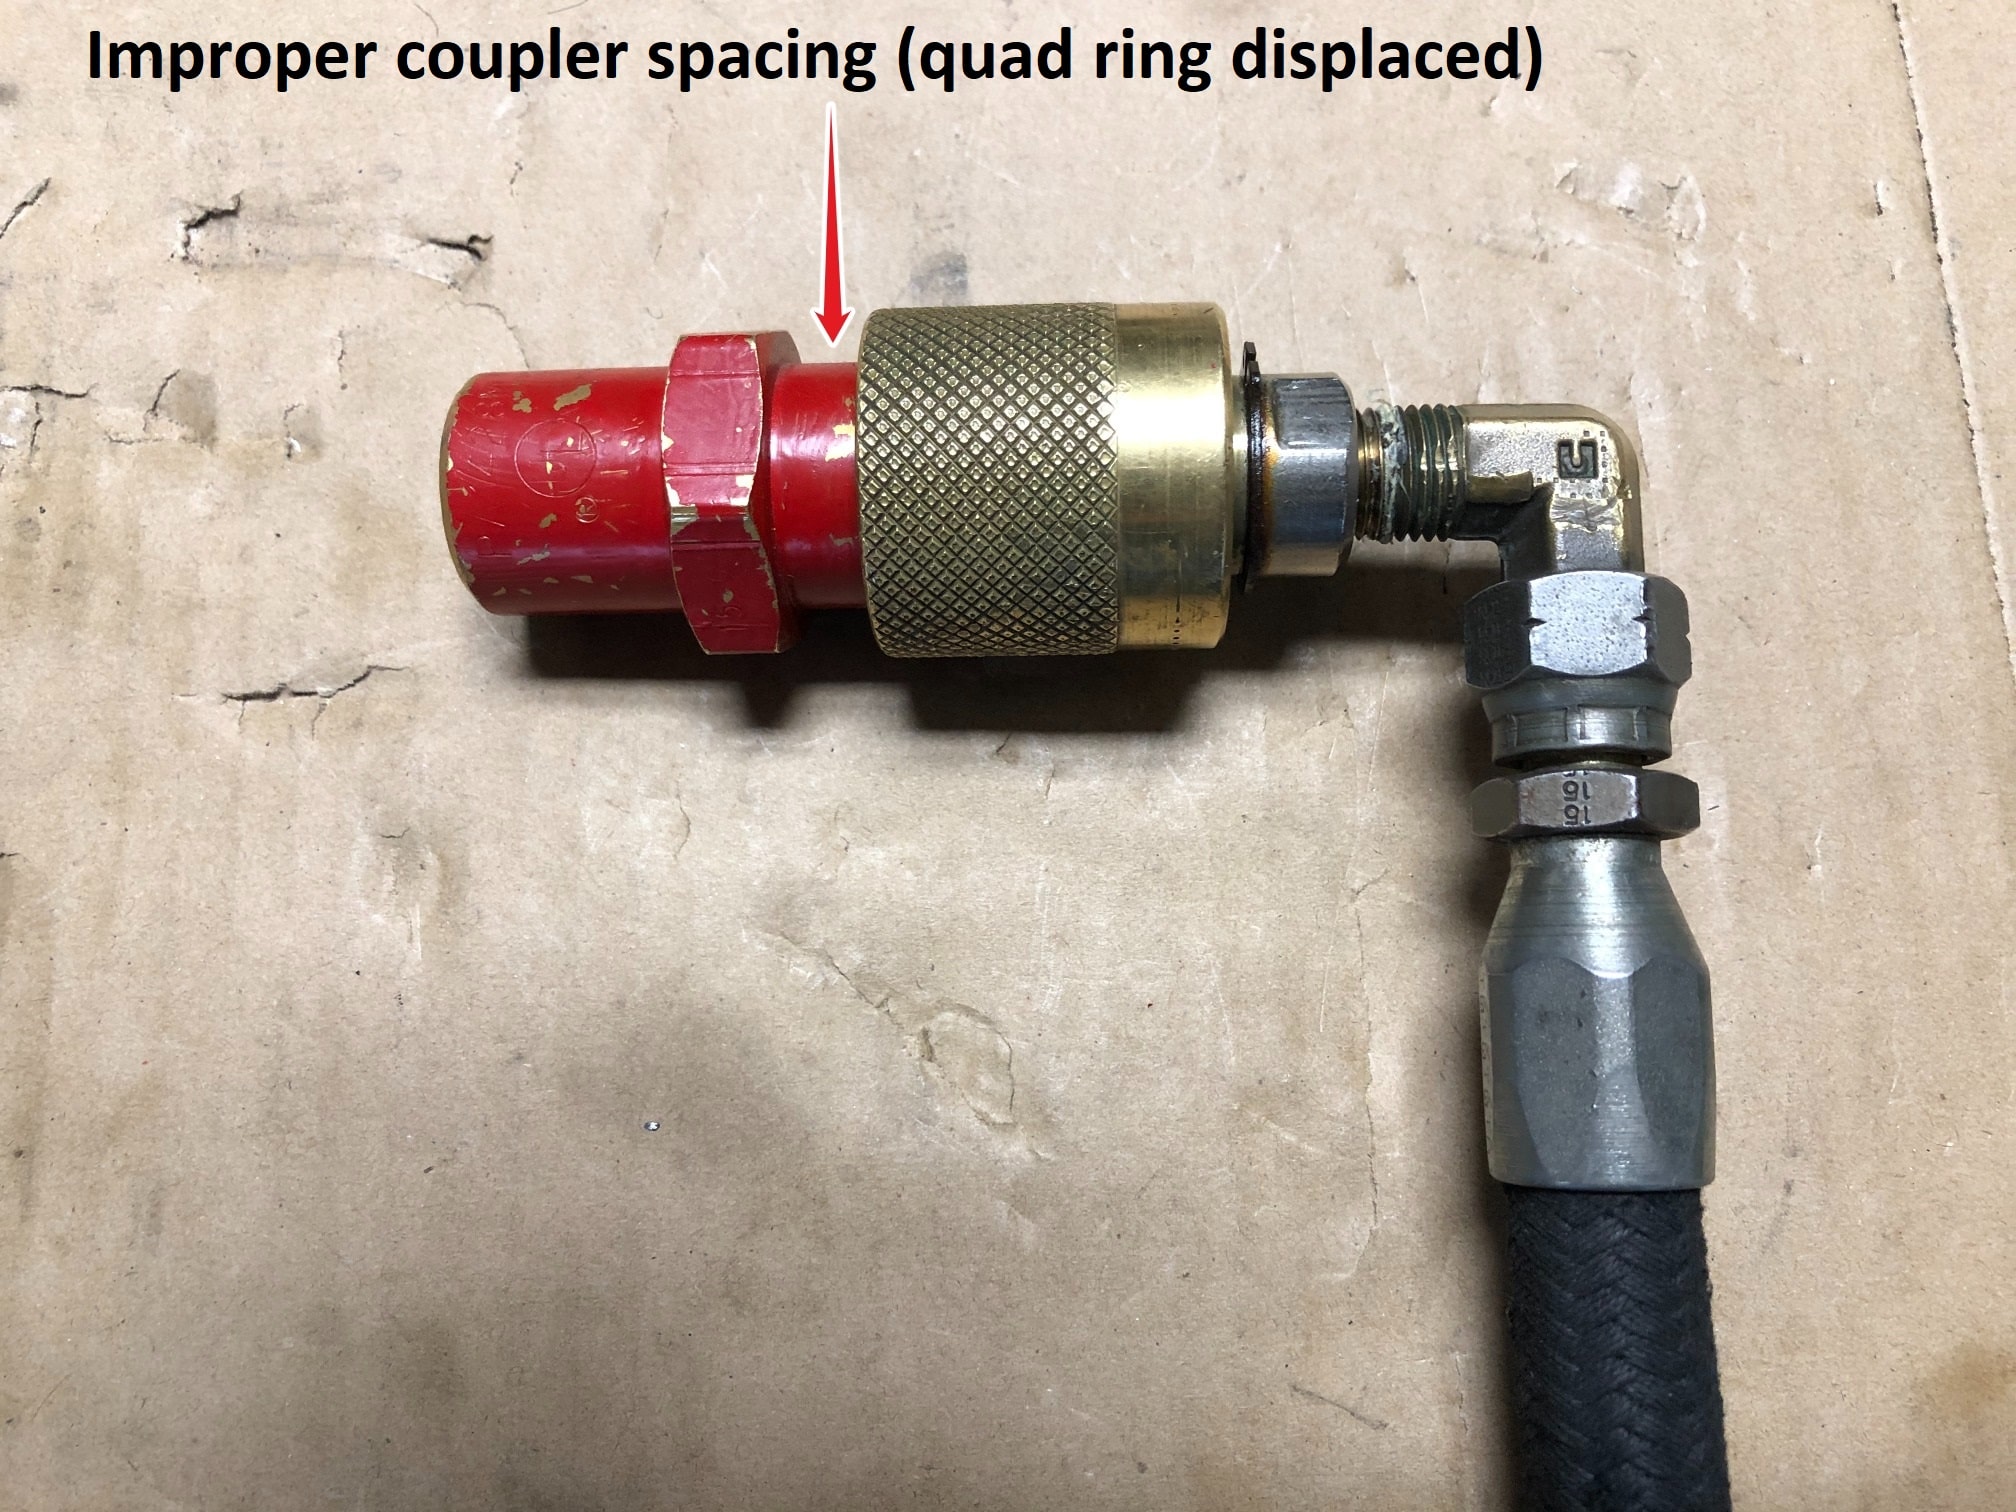 An example of an improperly-connected propane fuel coupler, with too much space between each coupler